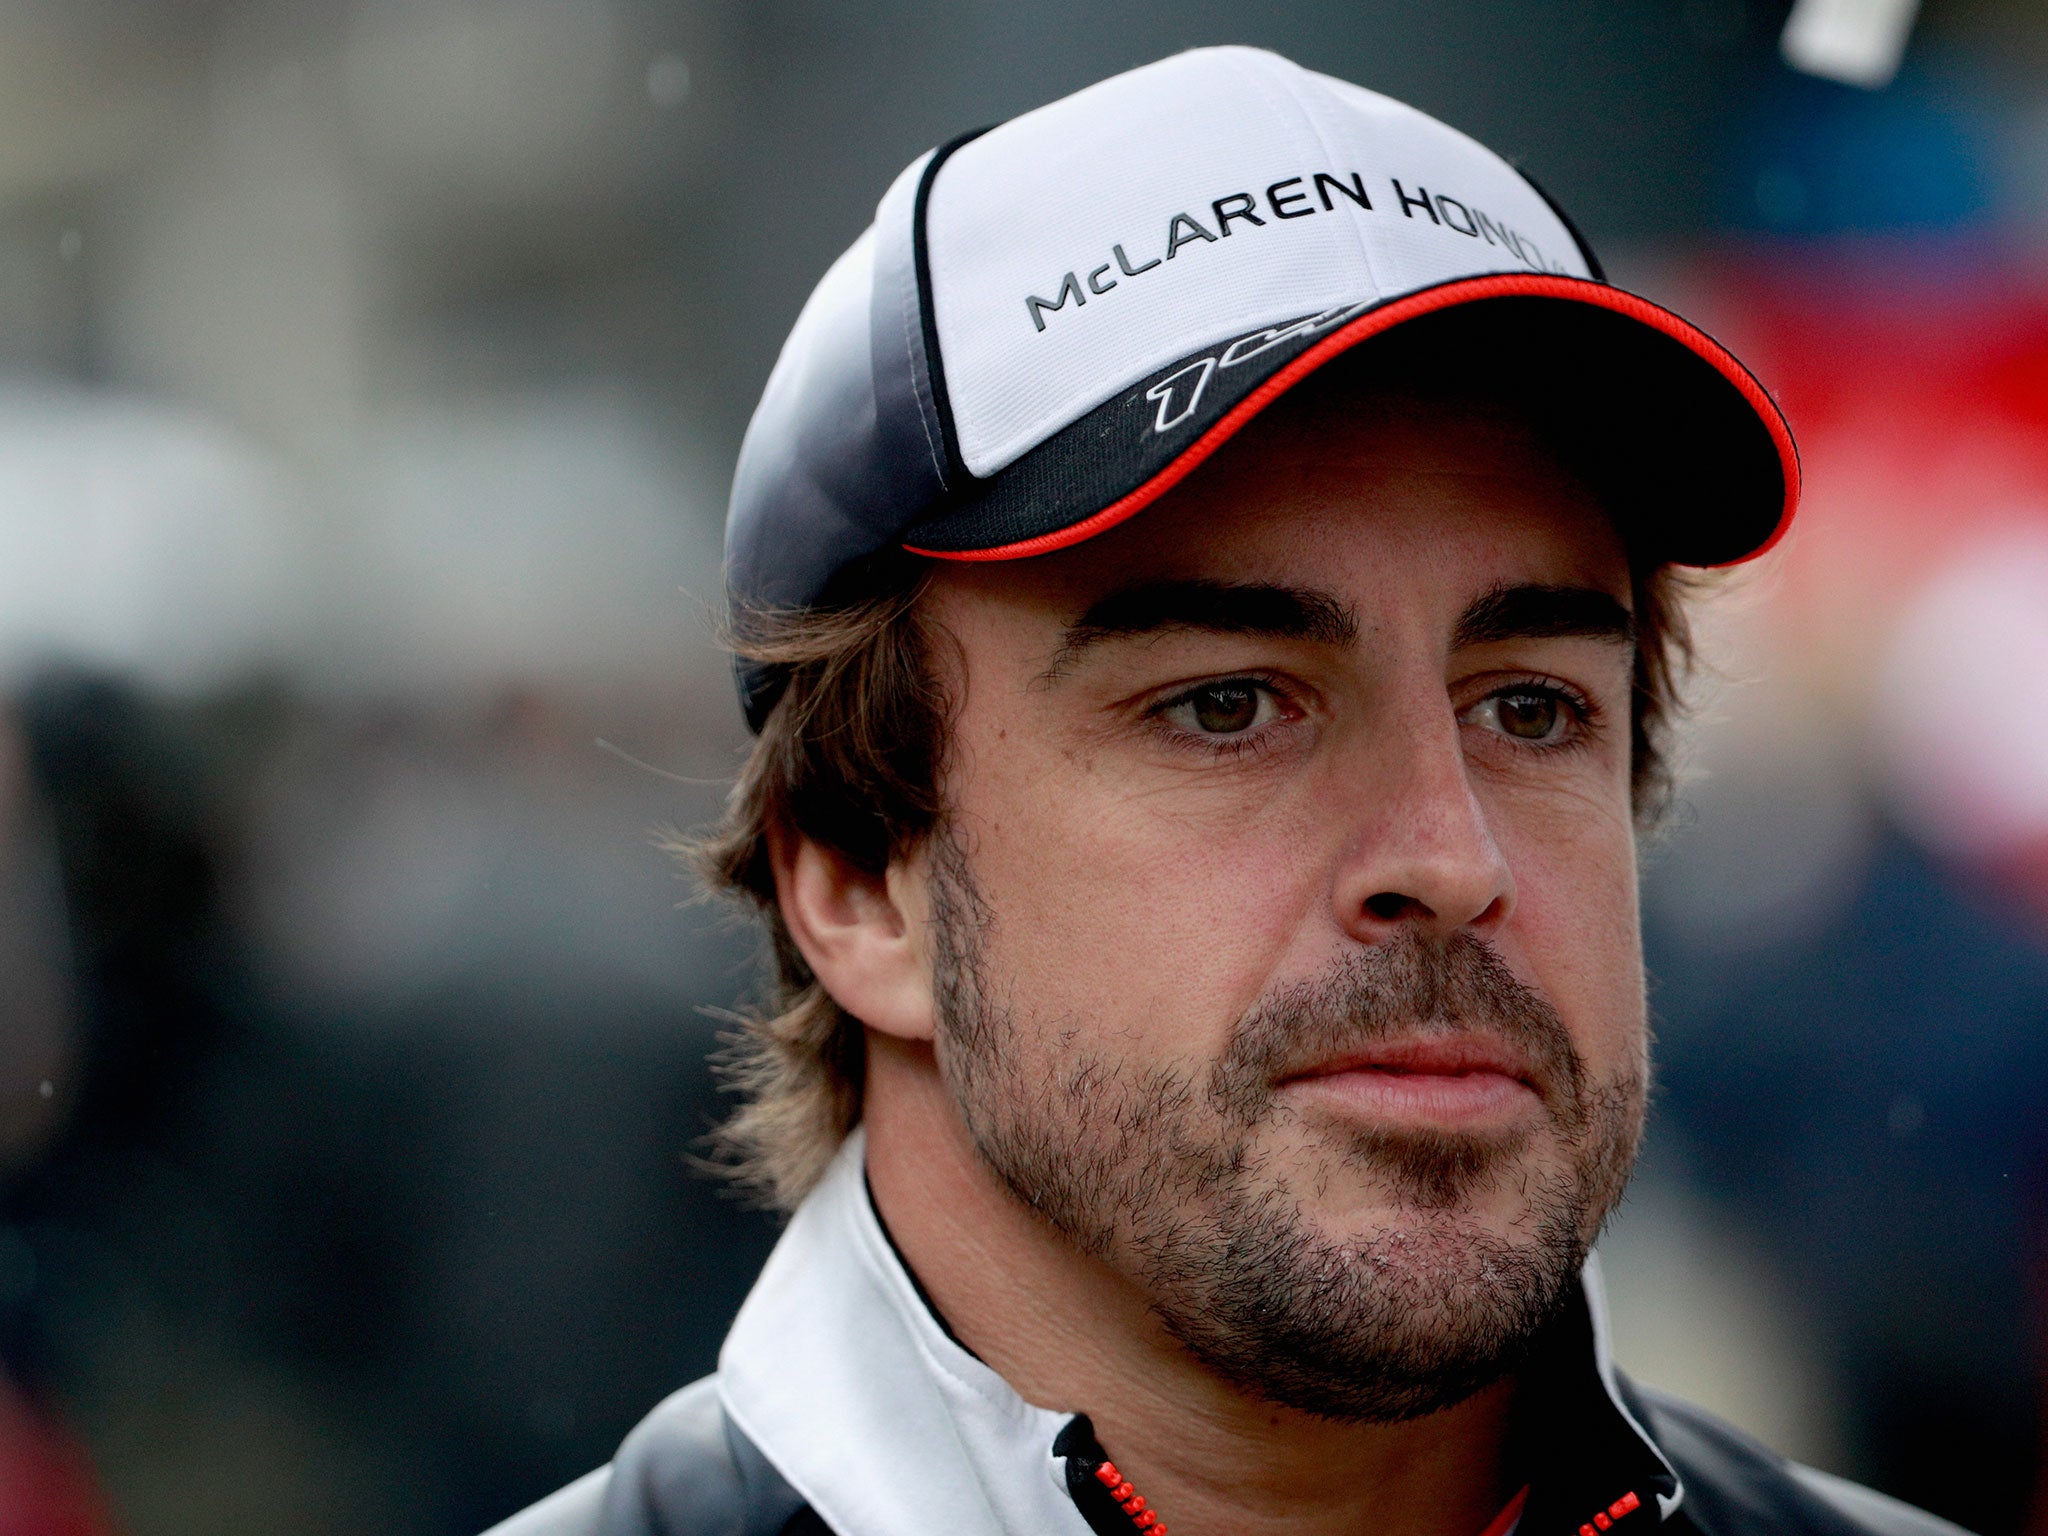 Alonso turned down a move to replace Rosberg at Mercedes